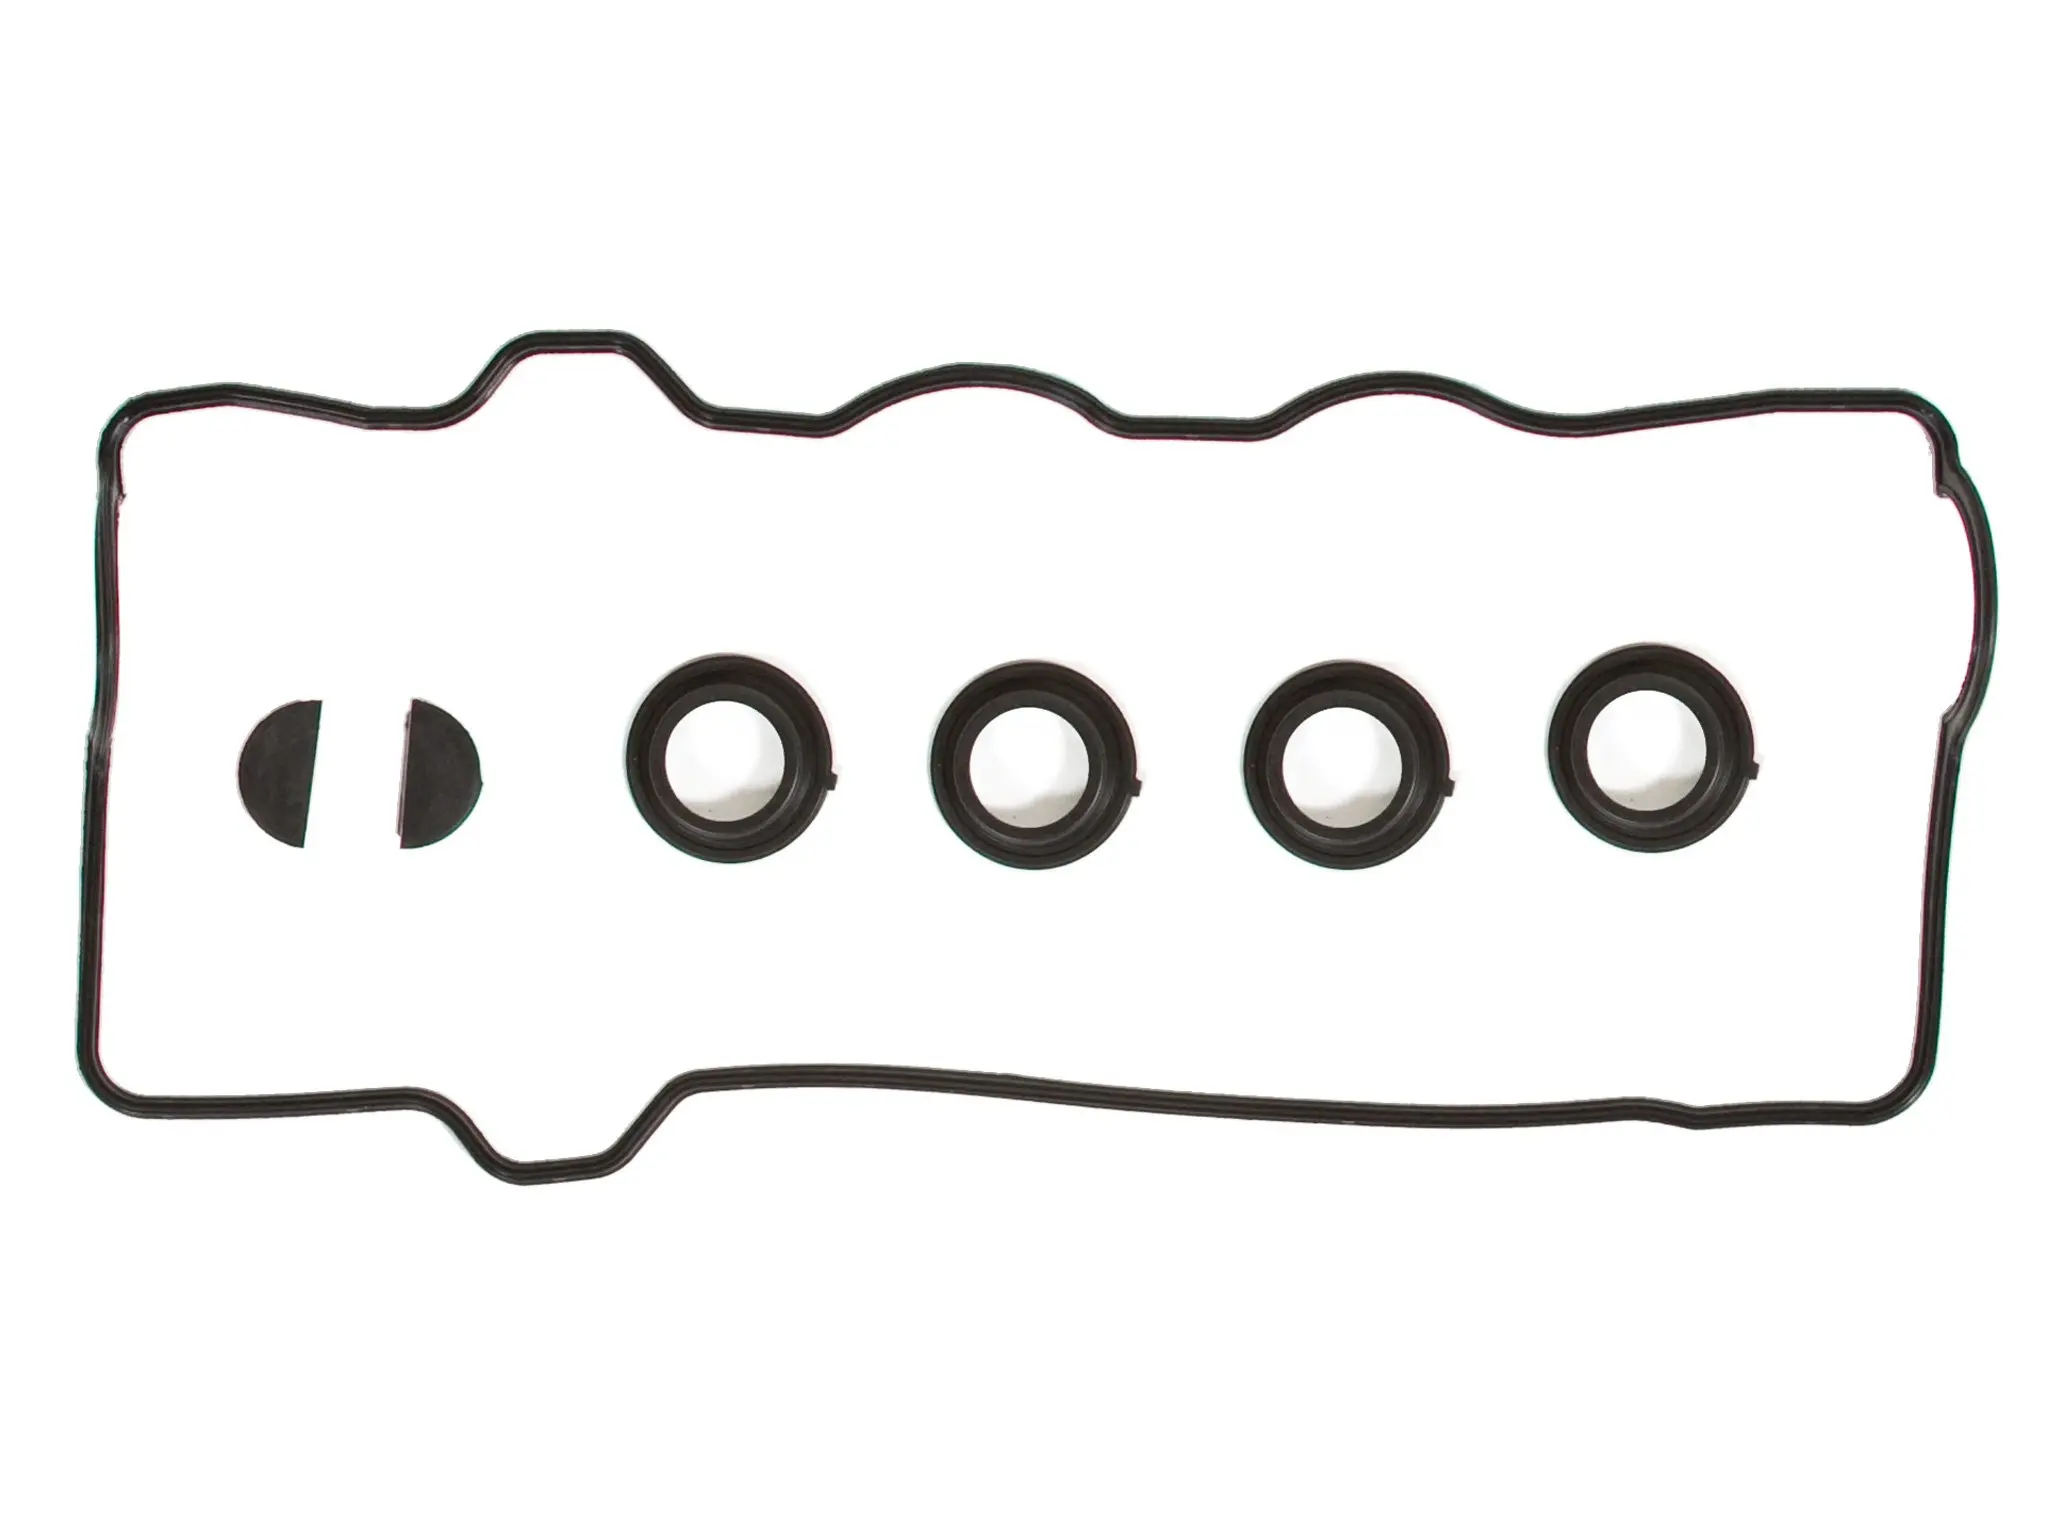 OBX Exhaust Header Gasket fits 91-95 Toyota MR2 2.2L 5S-FE DOHC N/A